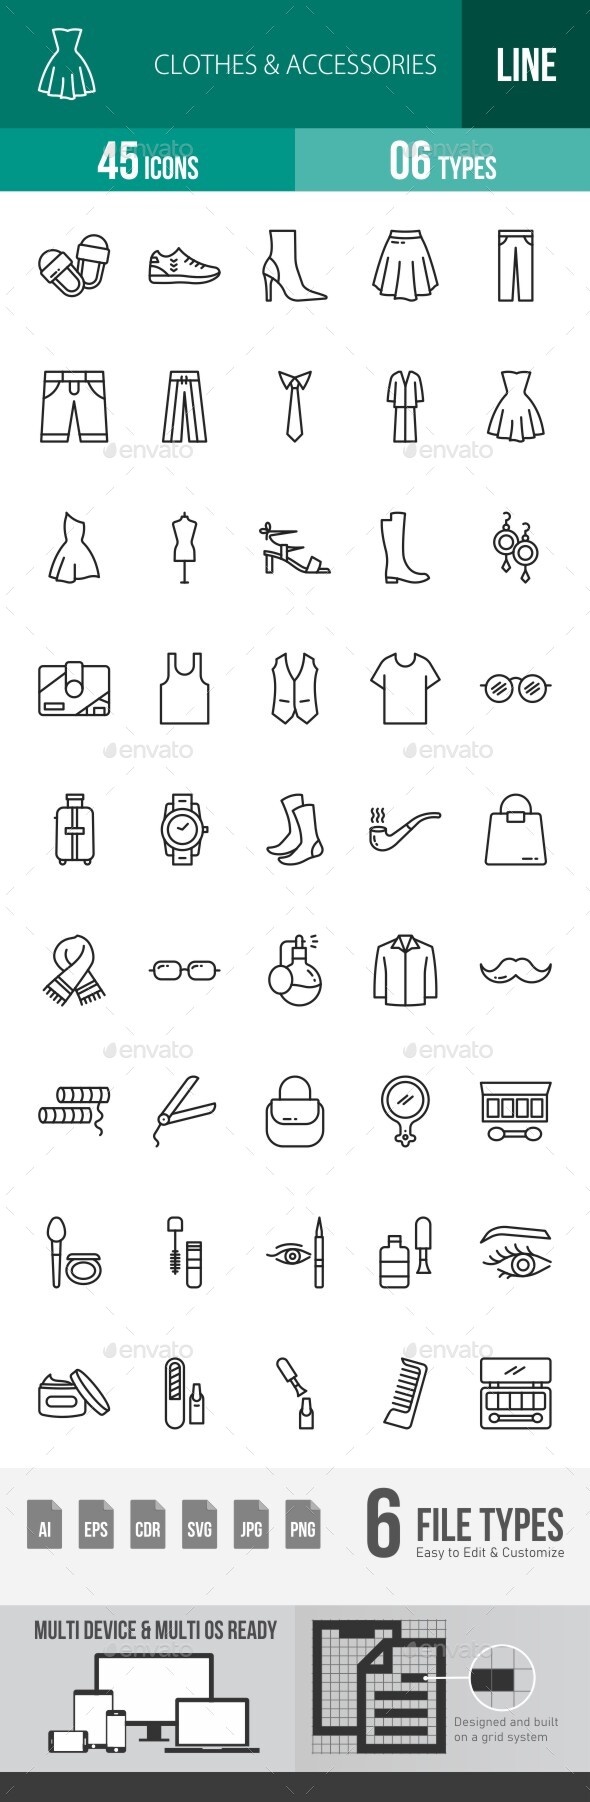 Clothes & Accessories Line Icons